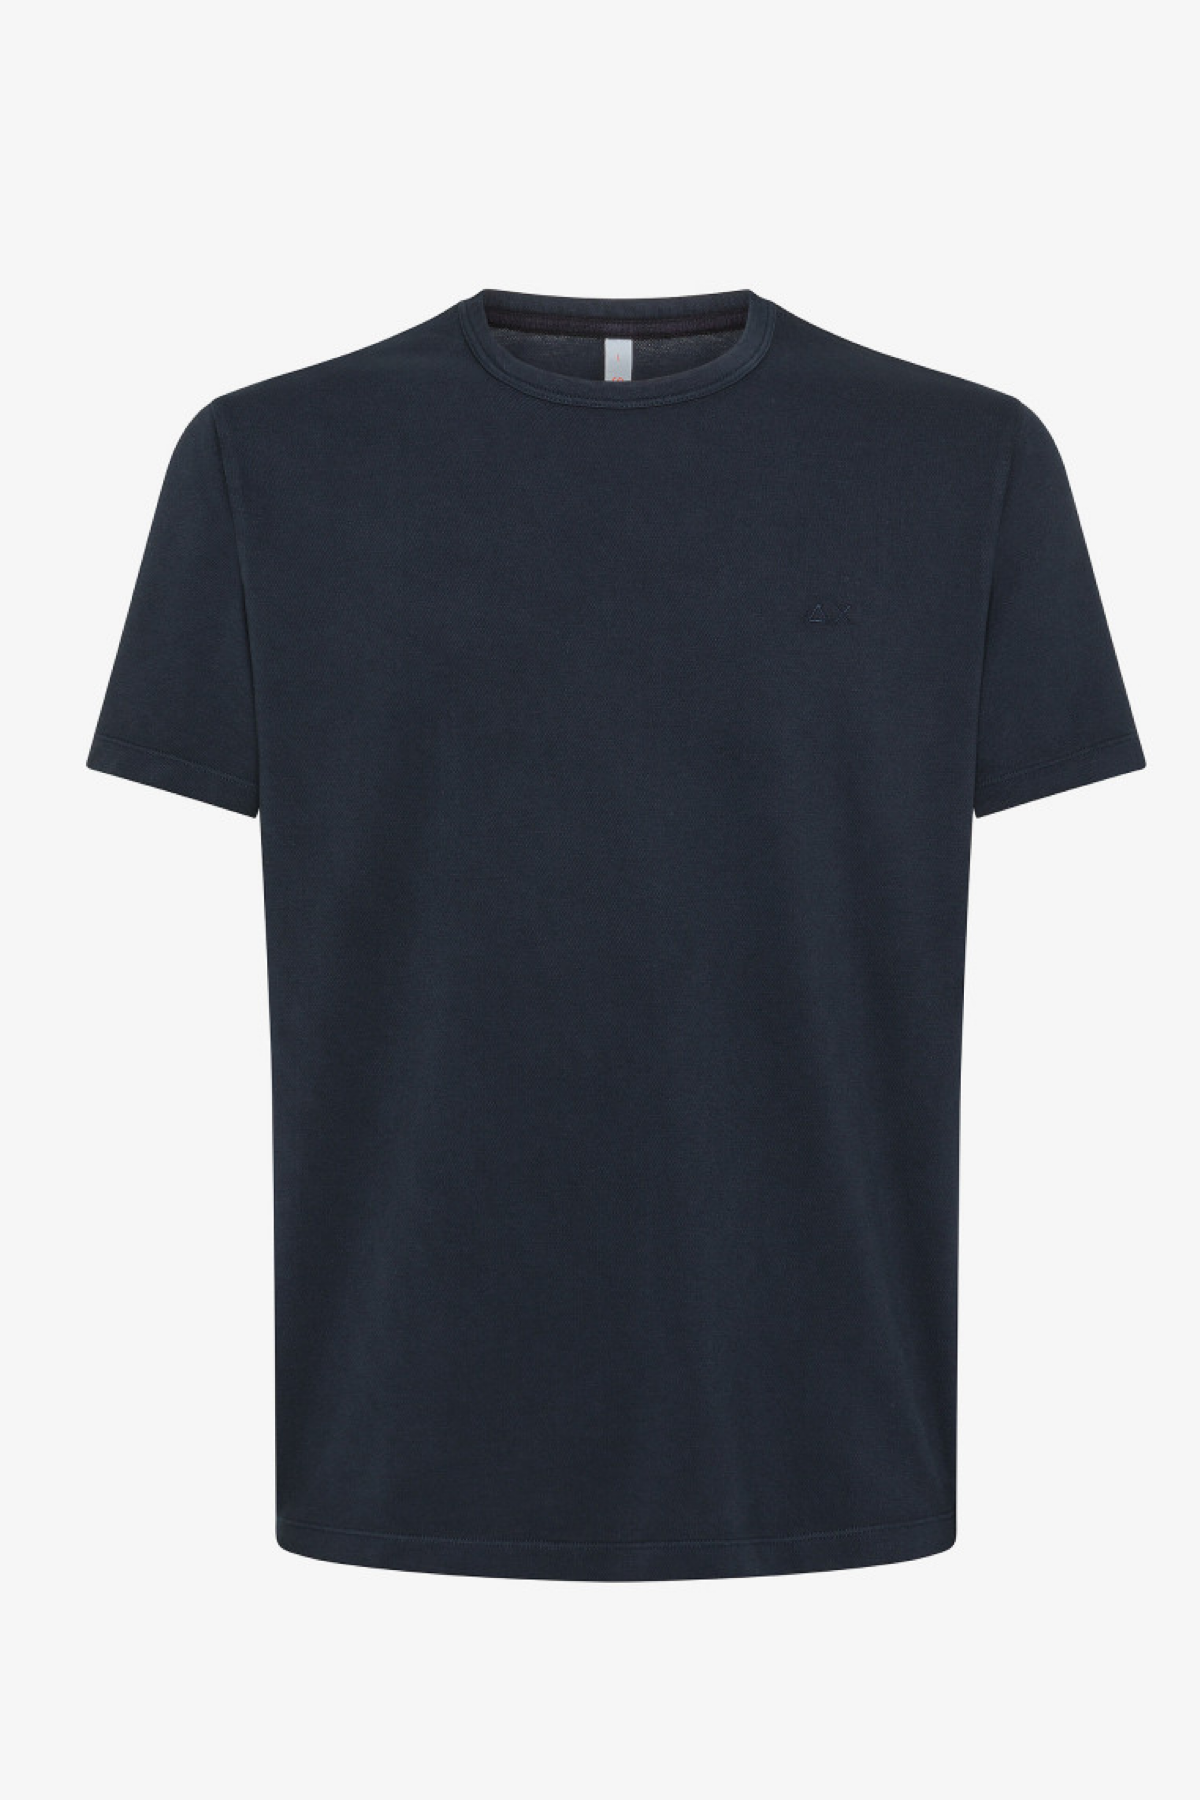 Sun68 t-shirt cold dyed T34127 navy